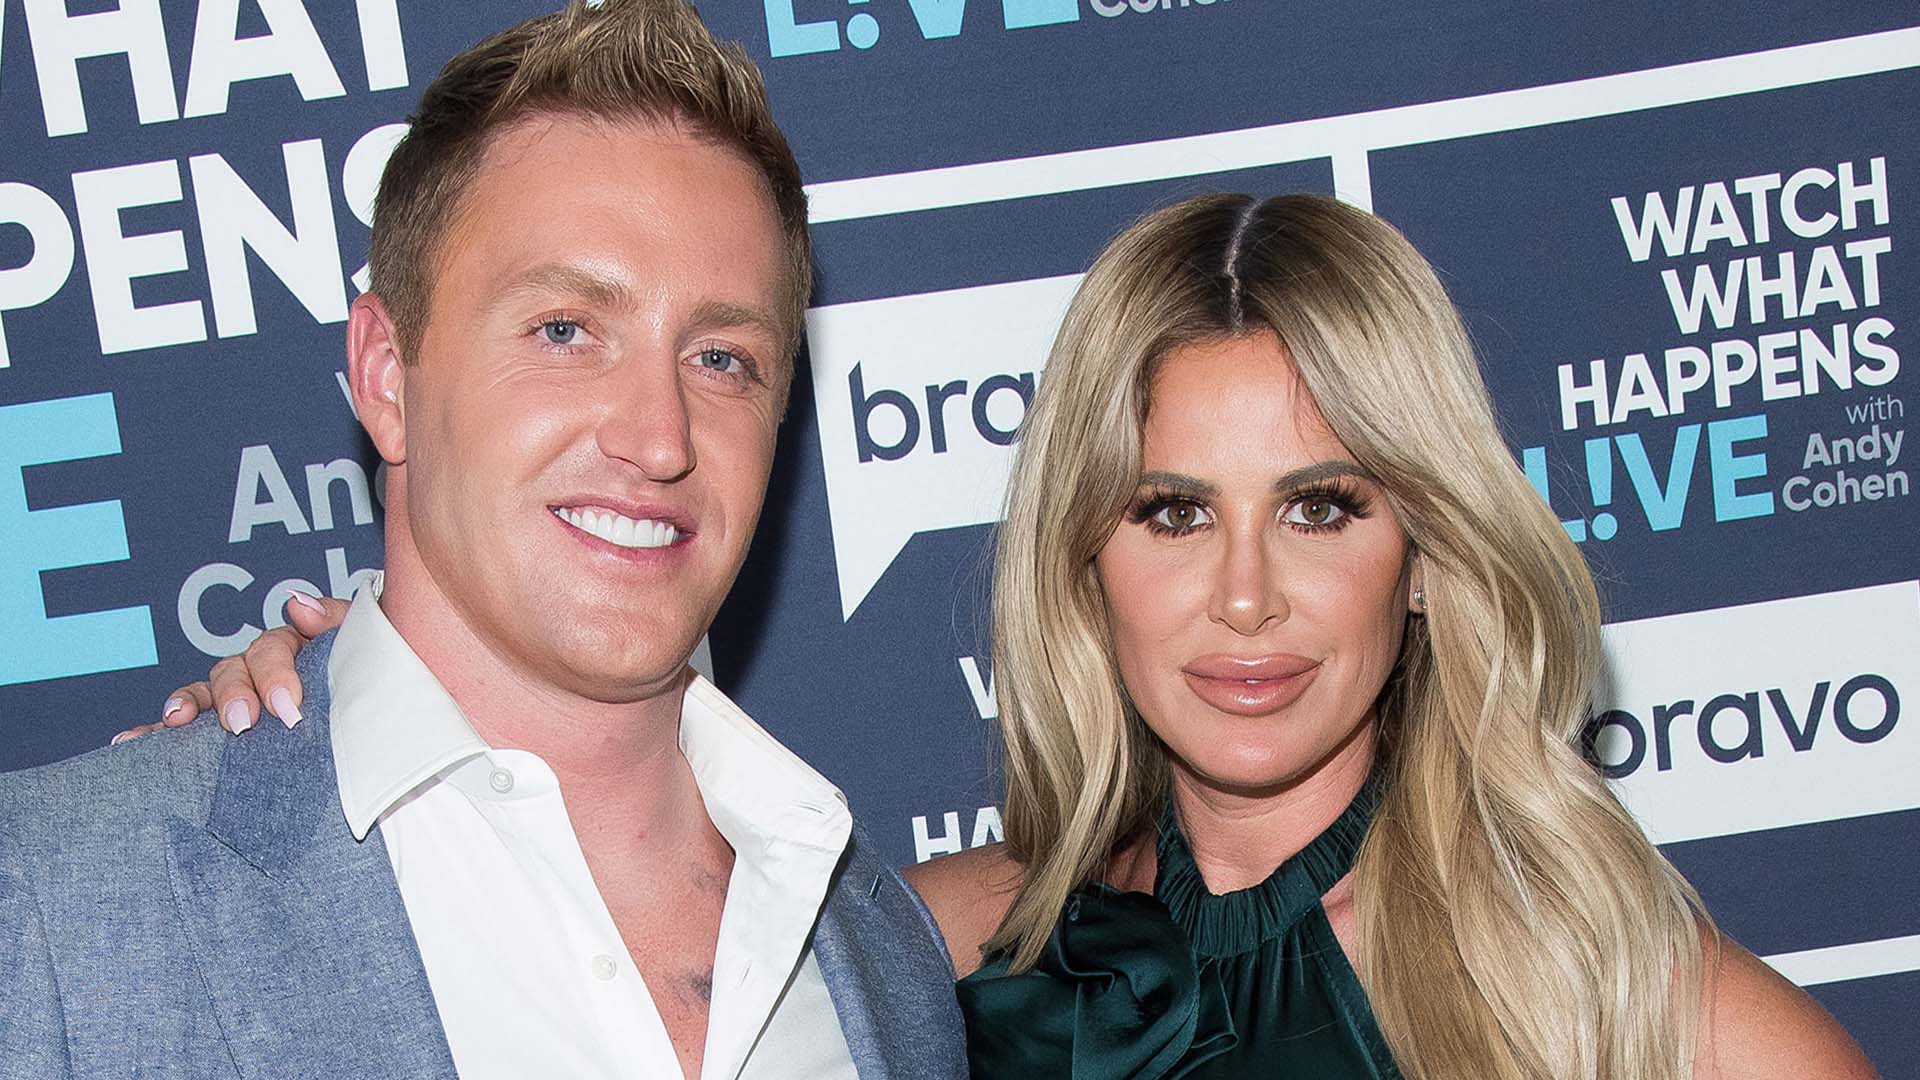 Kim Zolciak-Biermann and Daughter Brielle Have Night Out At Jason Aldeans Concert Entertainment Tonight pic picture image